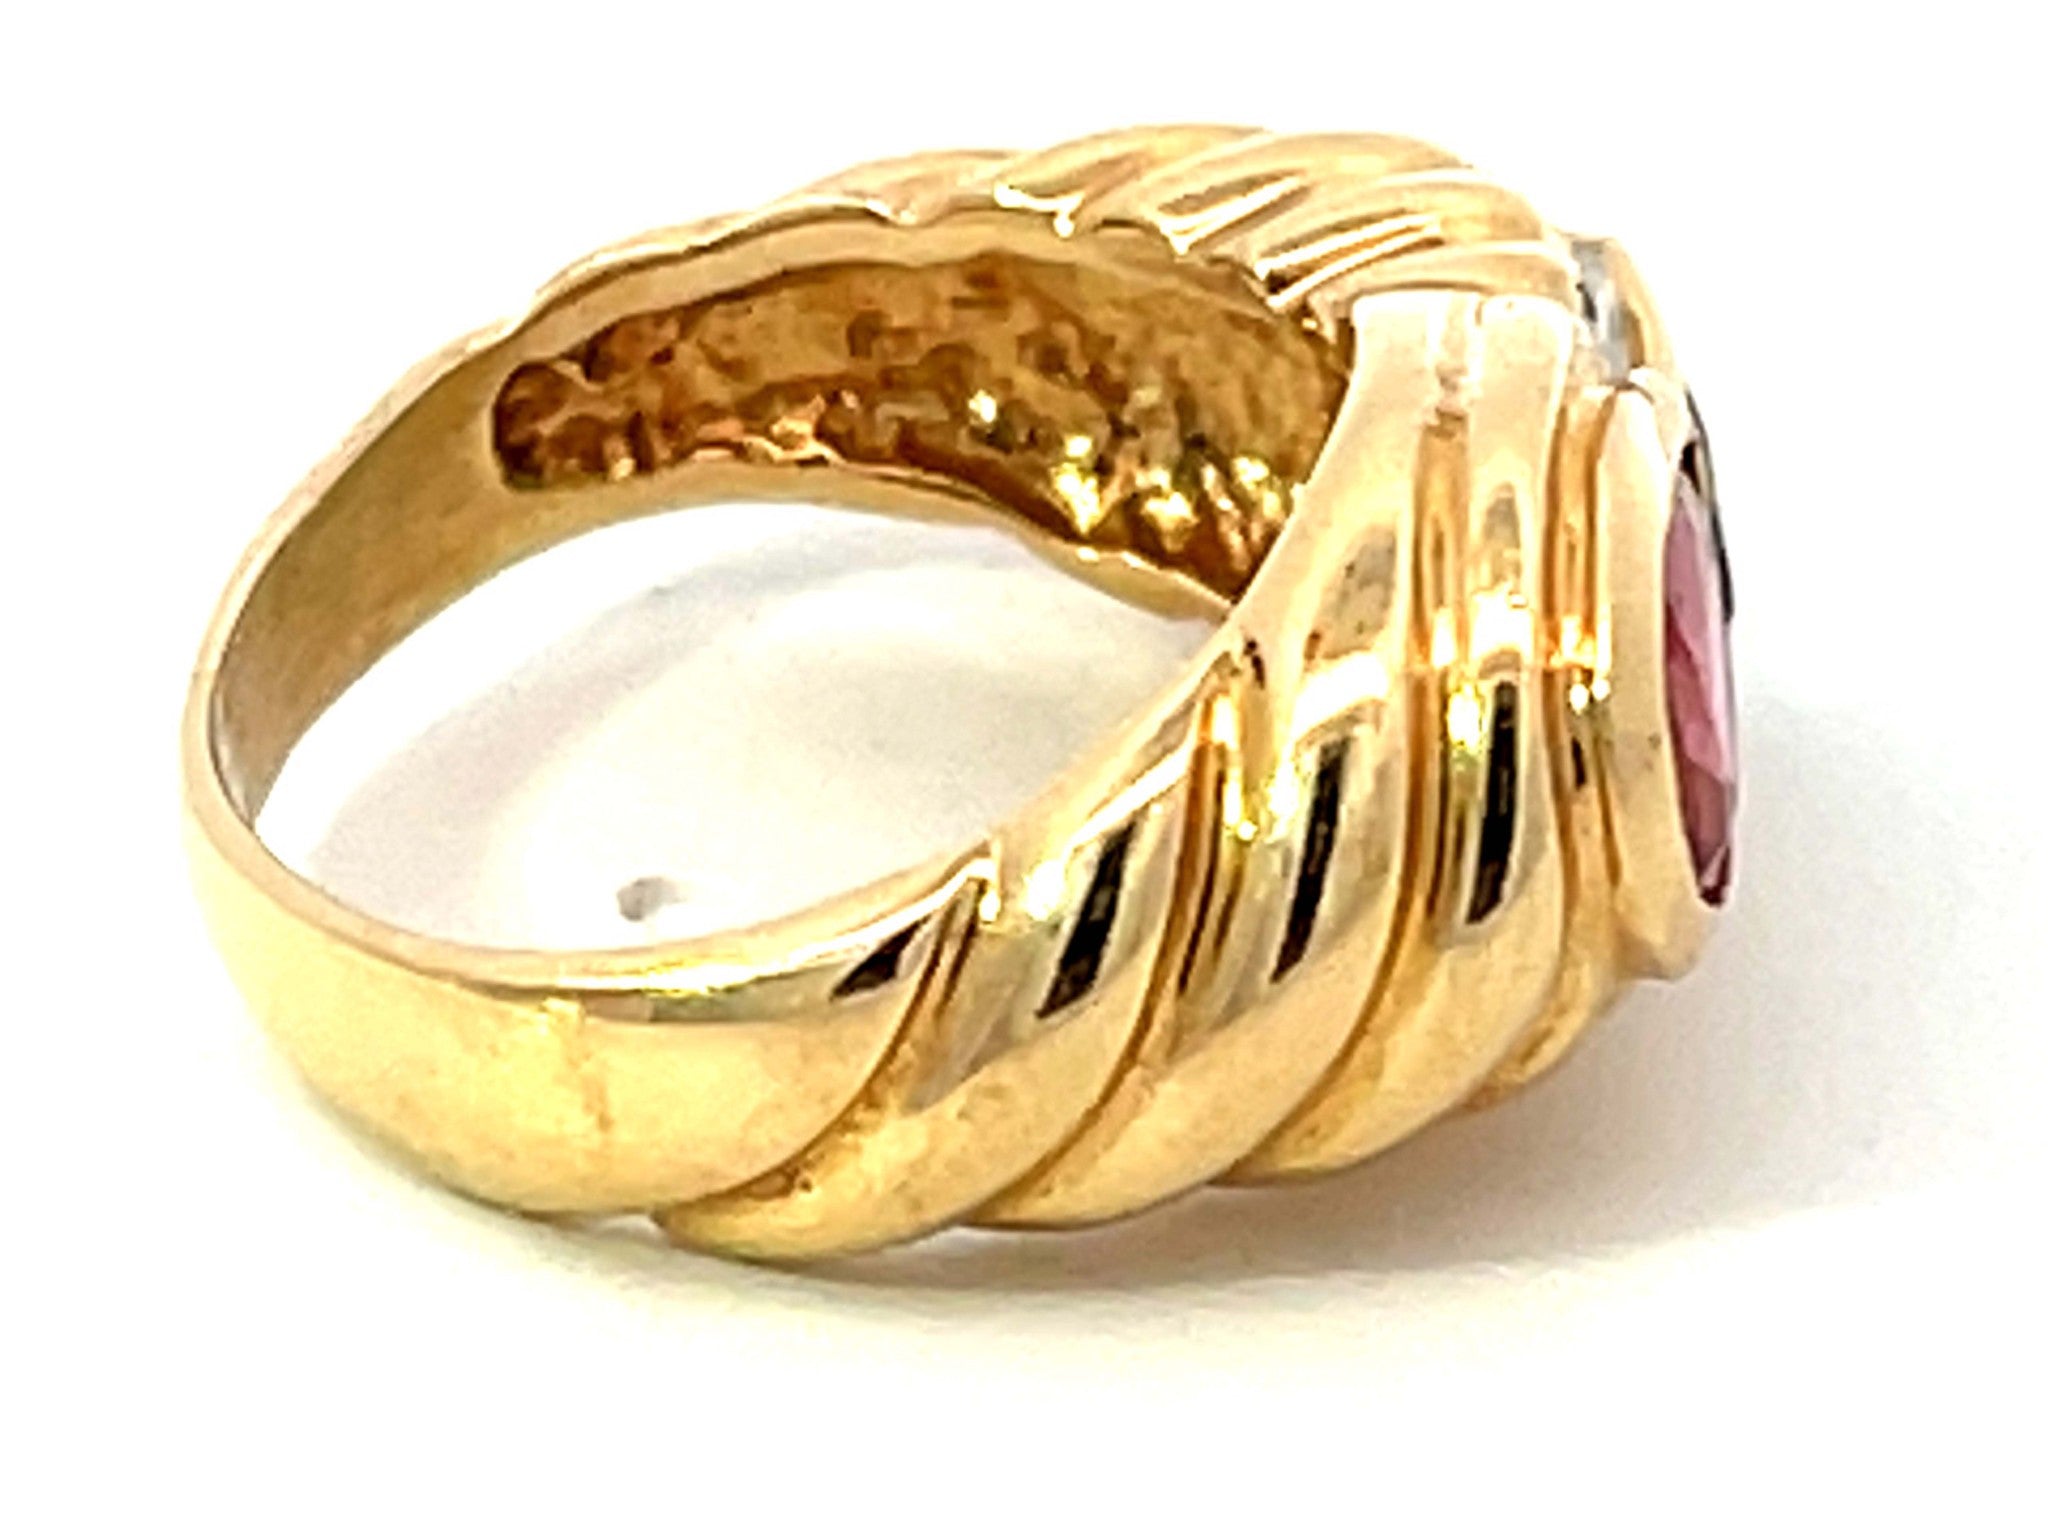 Pink and Indicolite Tourmaline Diamond Ring in 14k Yellow Gold